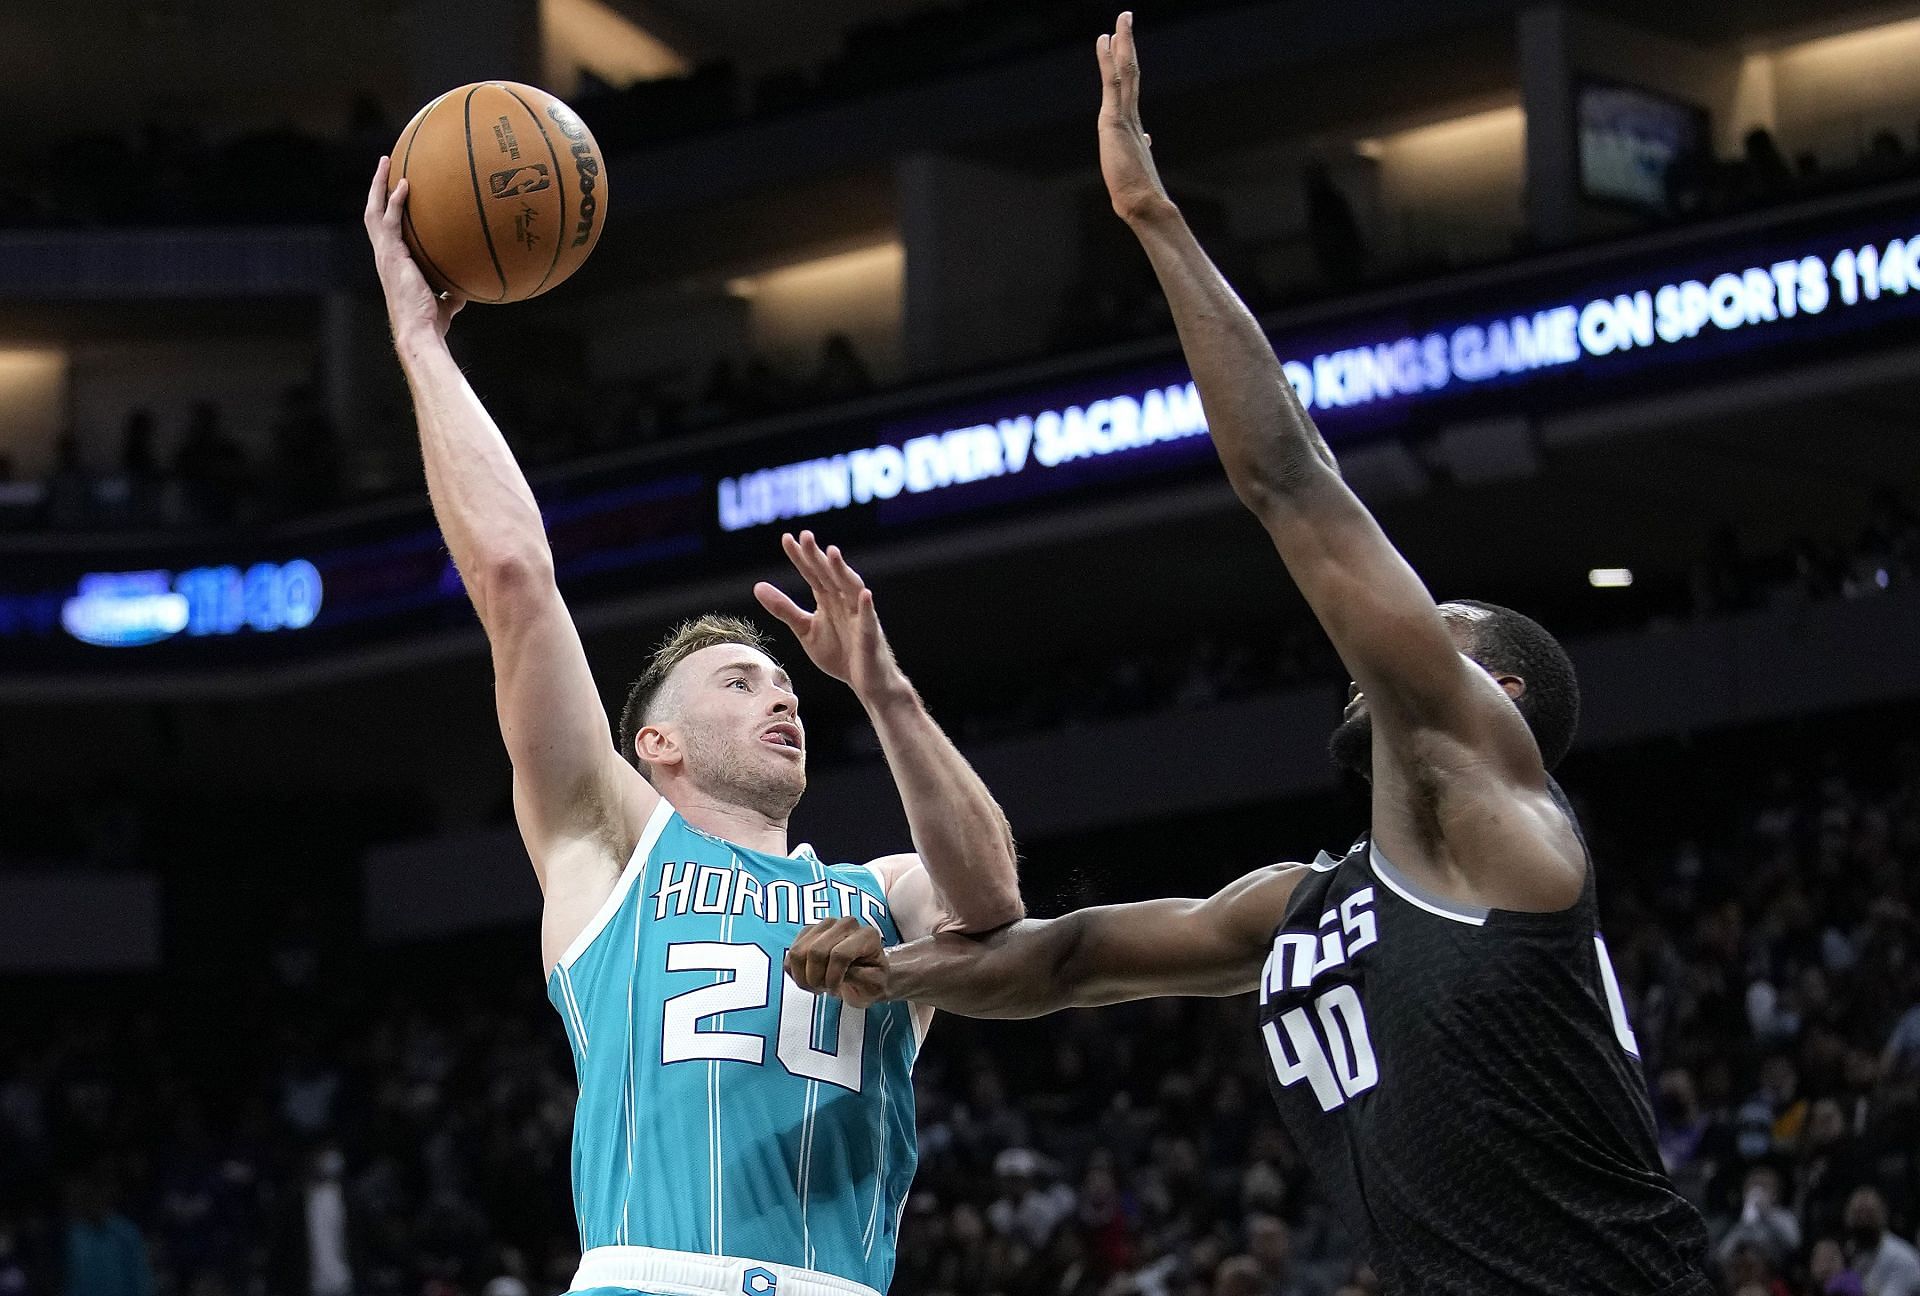 Hornets to sign Gordon Hayward to four-year, $120M contract